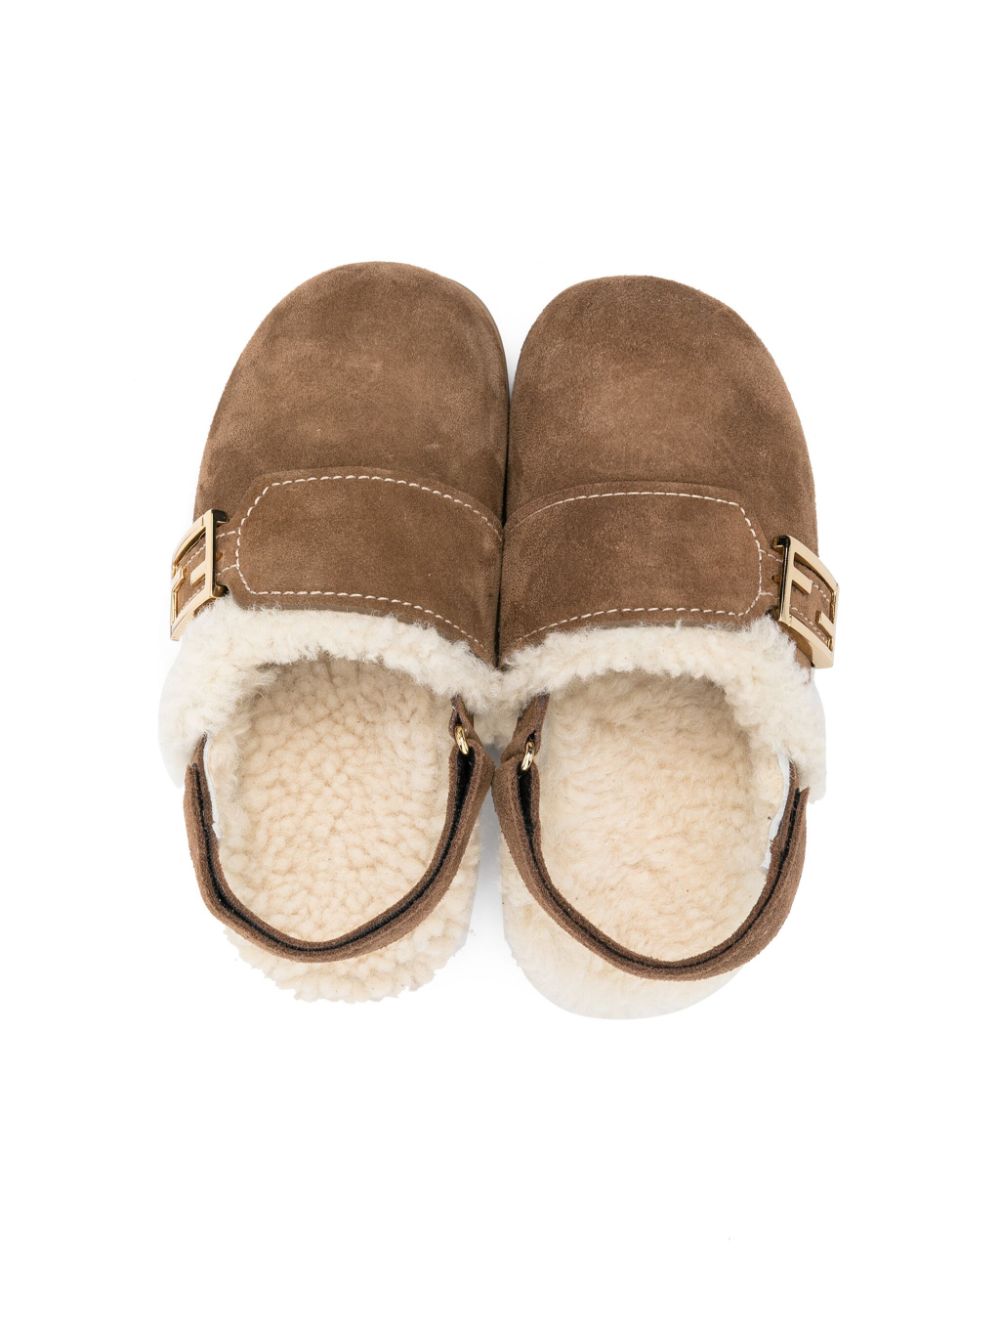 Beige leather sabot for girls with fur